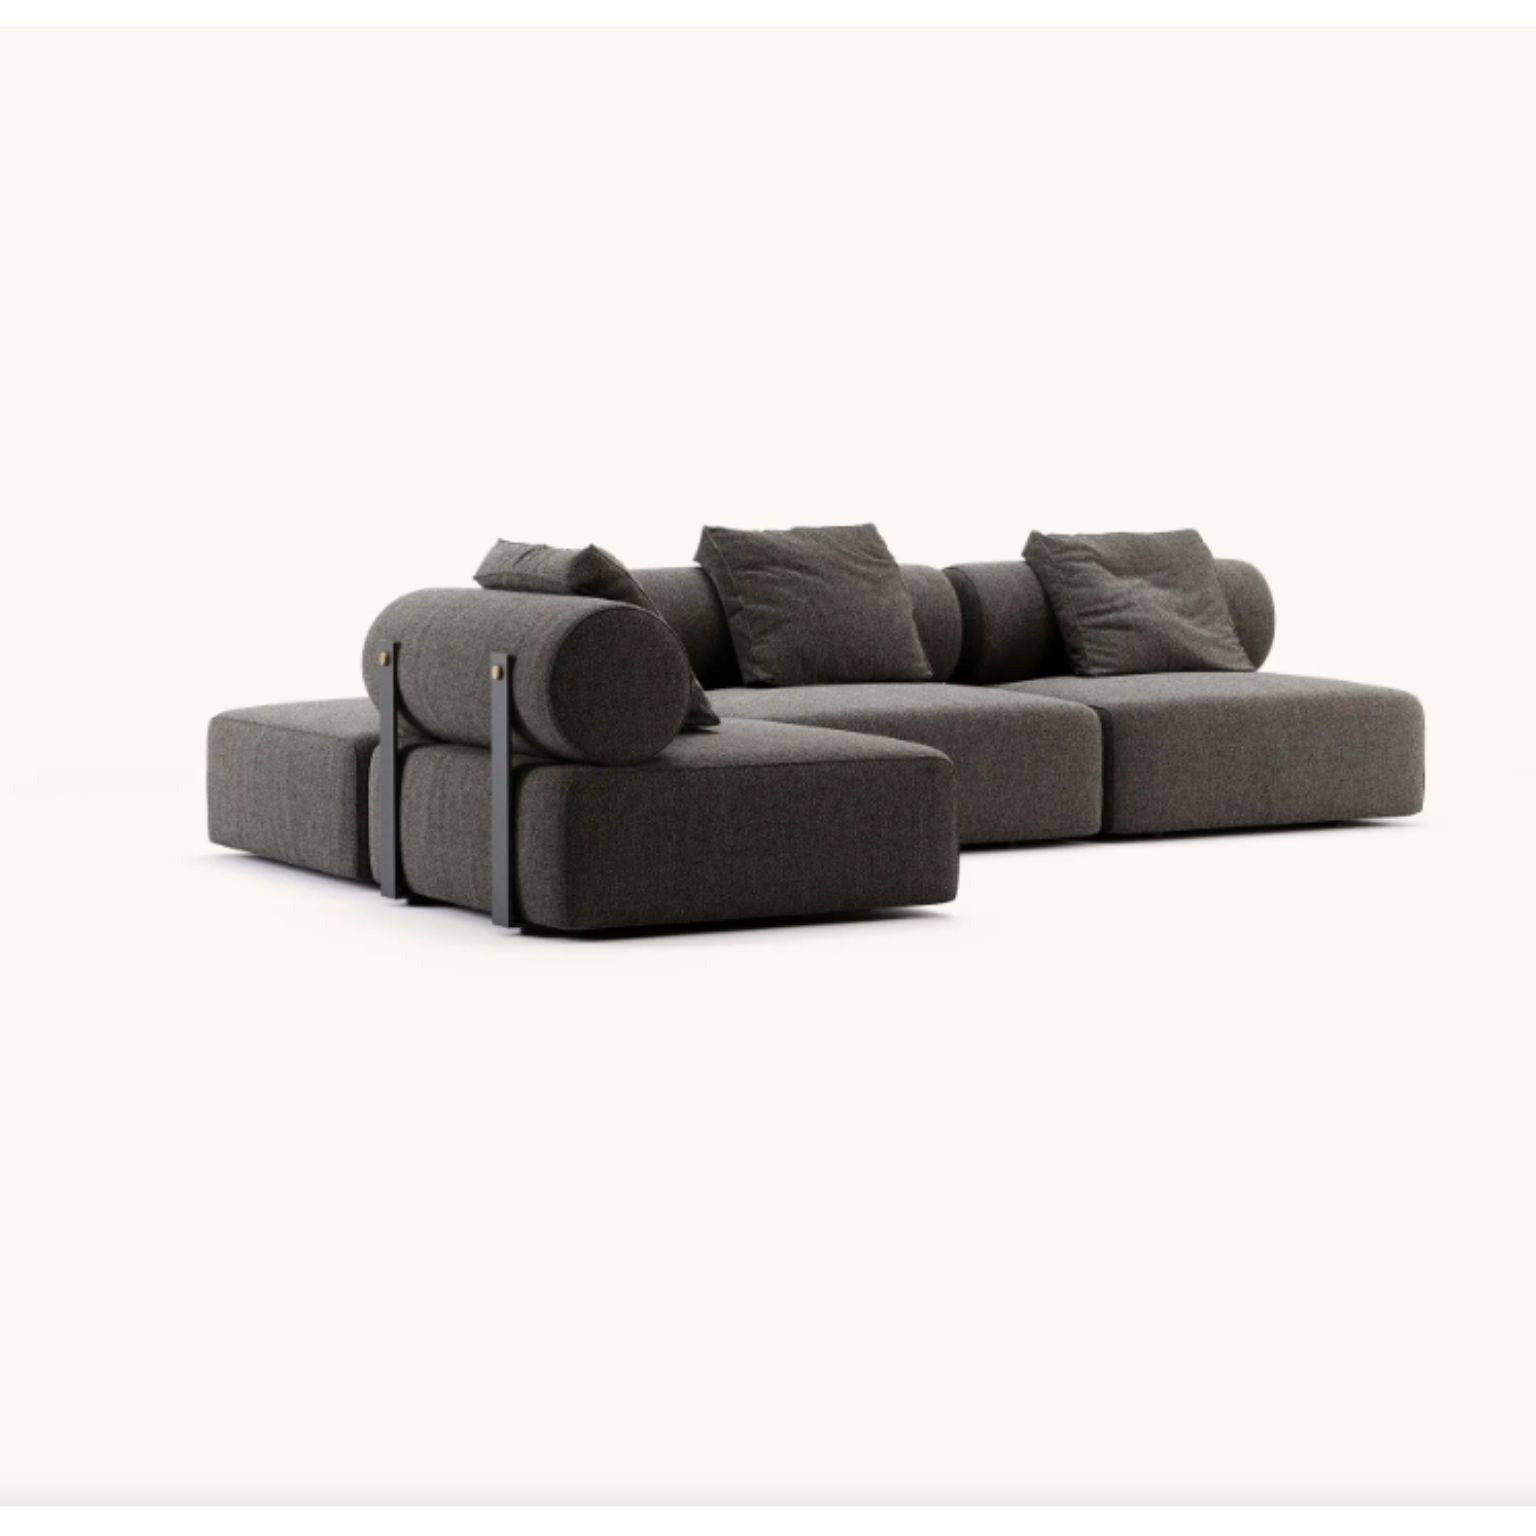 Shinto sofa by Domkapa
Materials: Fabric (Helmand 53), black texturized steel, gold brushed stainless steel. 
Dimensions: W 302 x D 162 x H 82 cm.
Also available in different materials.
with 3 pillows included in the same fabric as the